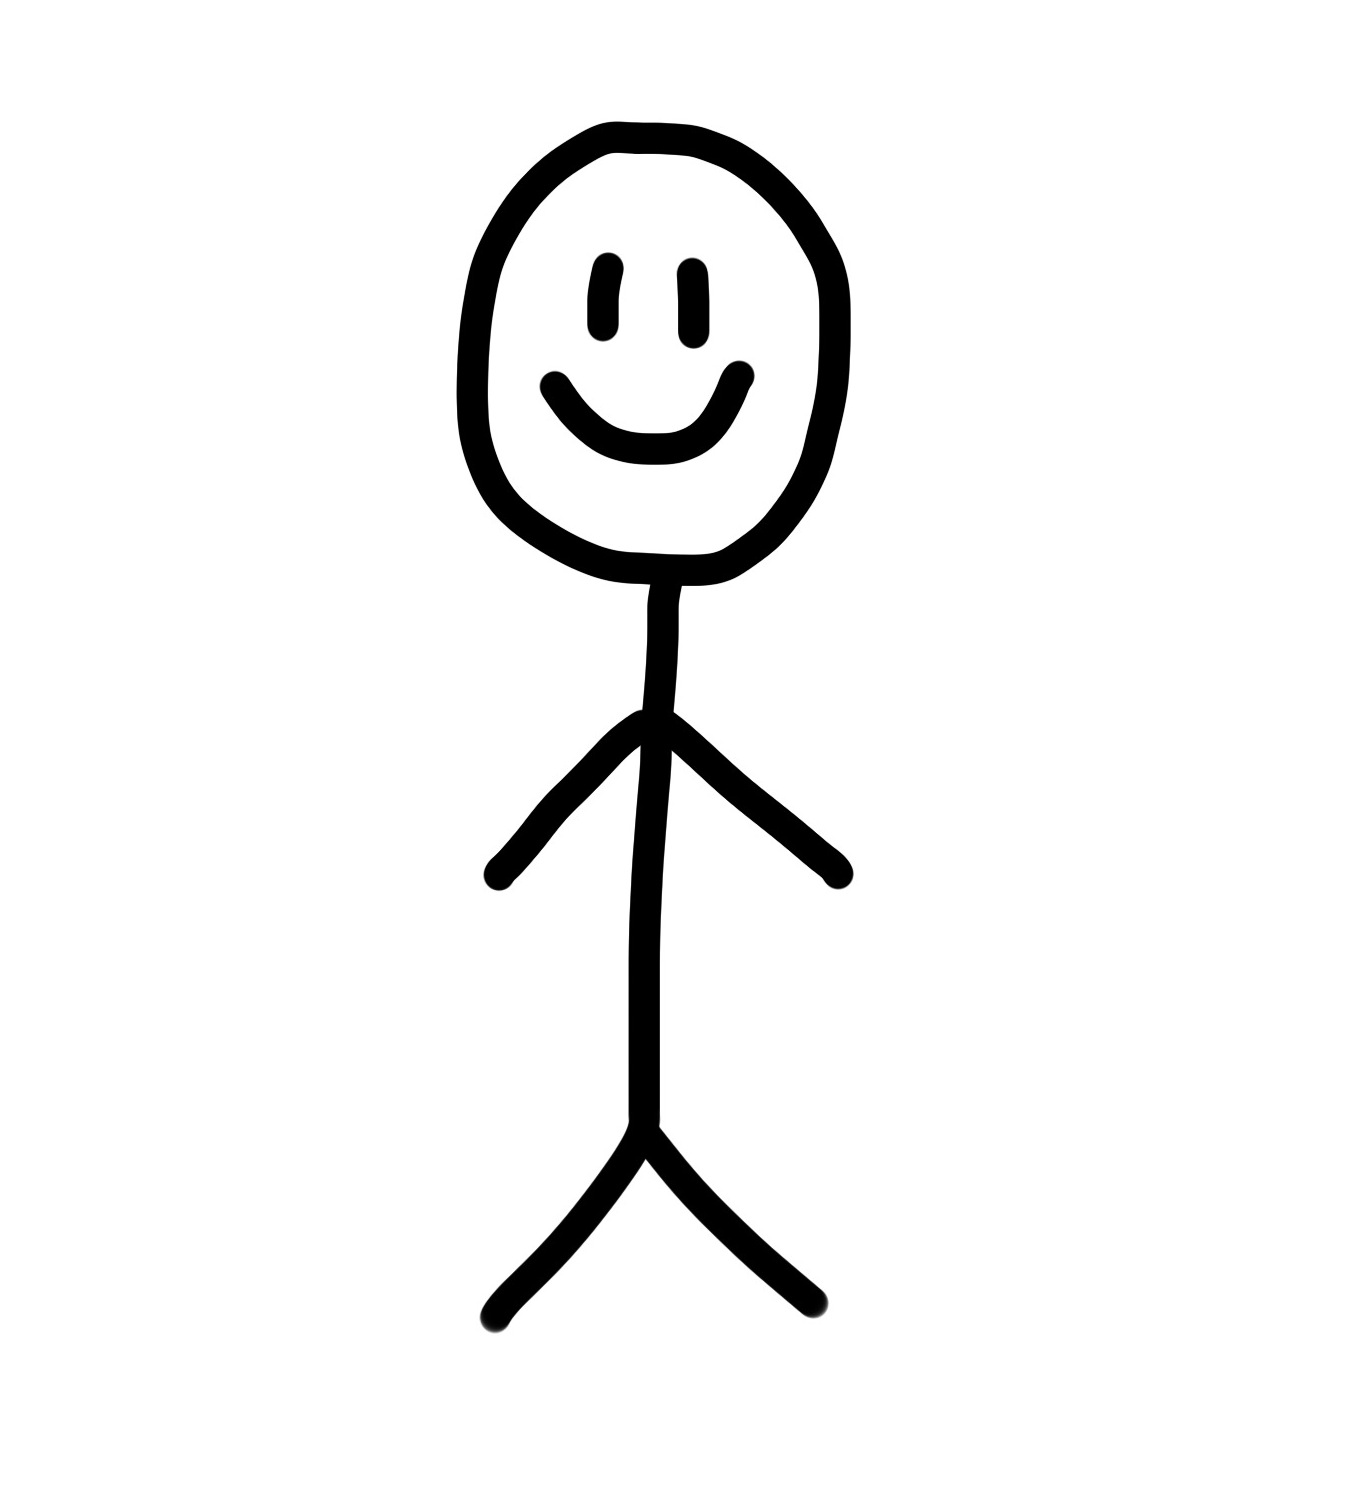 Free Stick Person Png, Download Free Clip Art, Free Clip Art